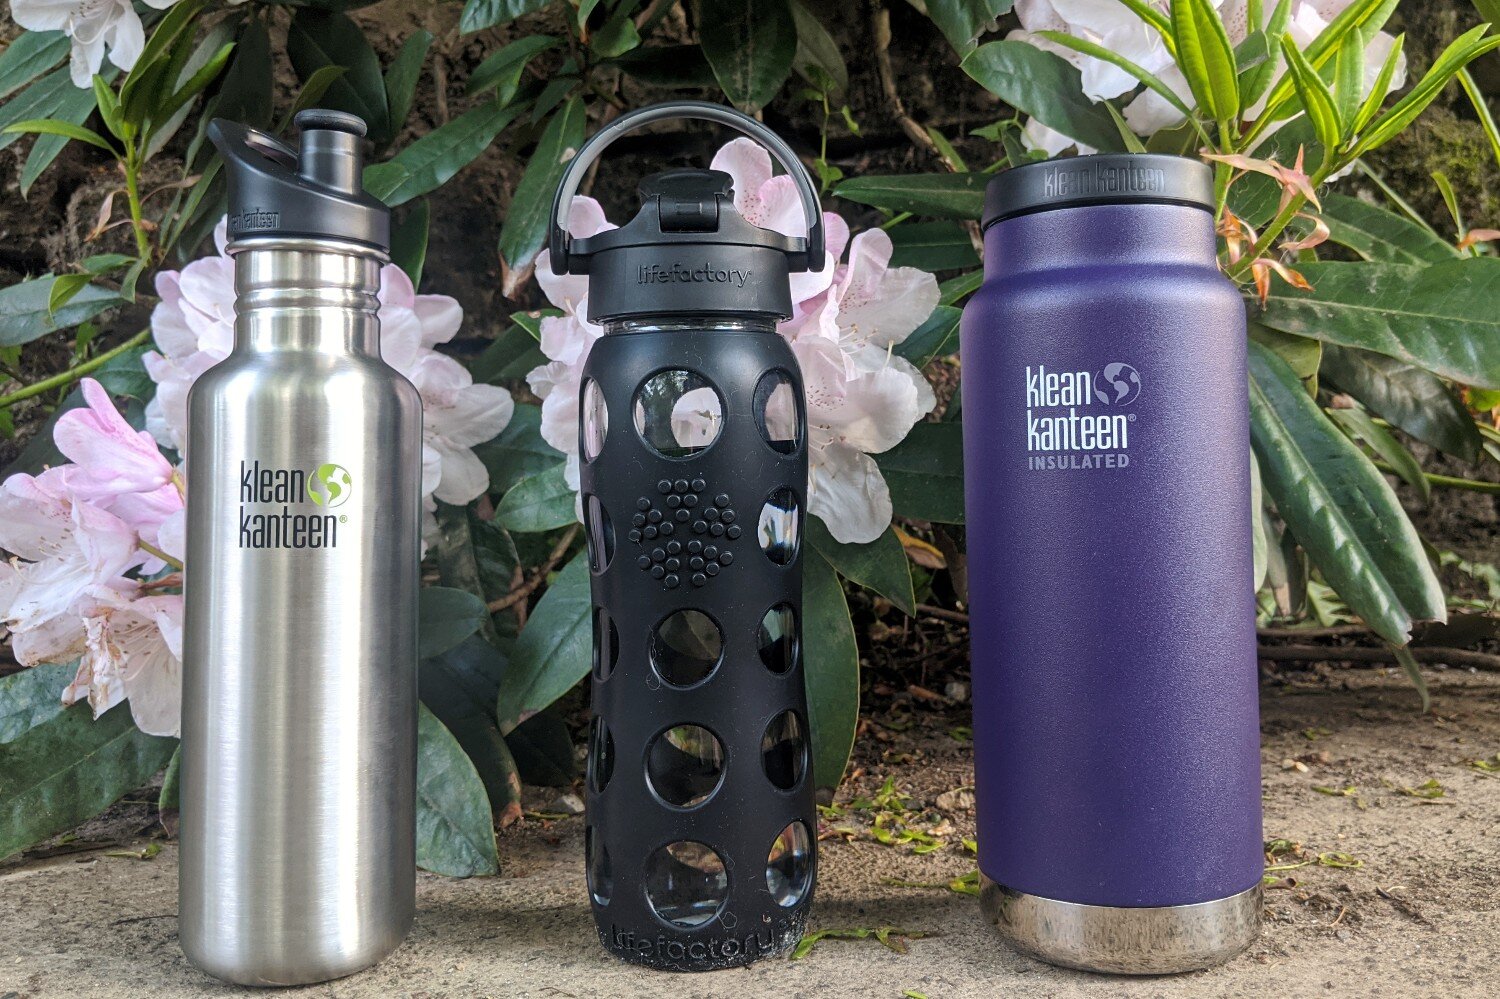 Klean Kanteen and Lifefactory go above and beyond with their commitments to sustainability.